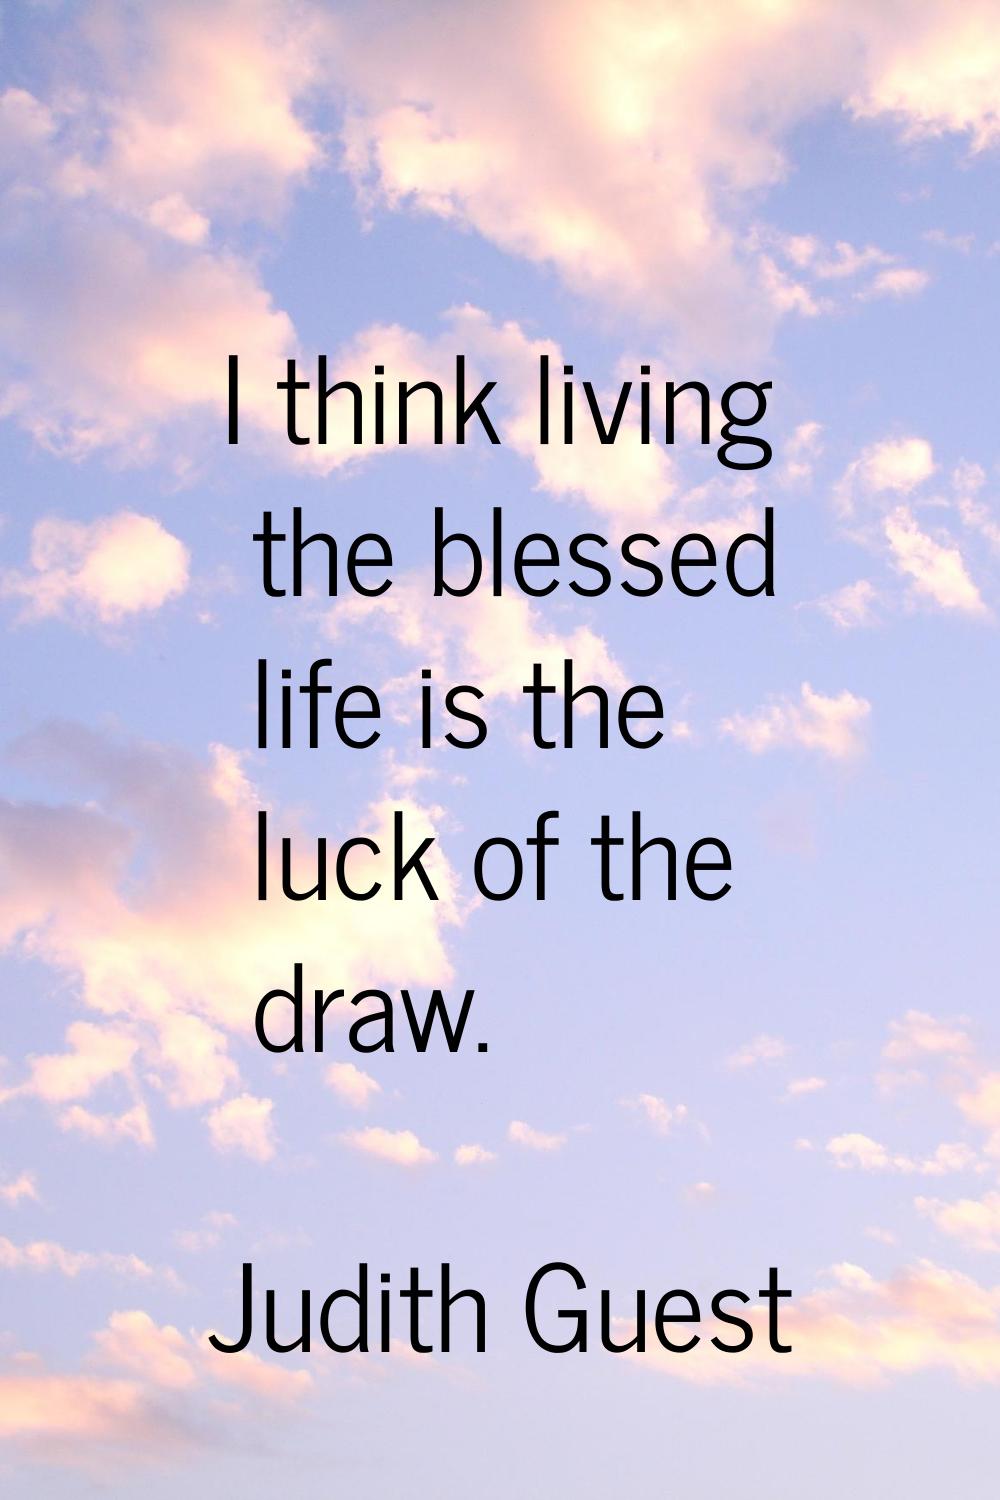 I think living the blessed life is the luck of the draw.